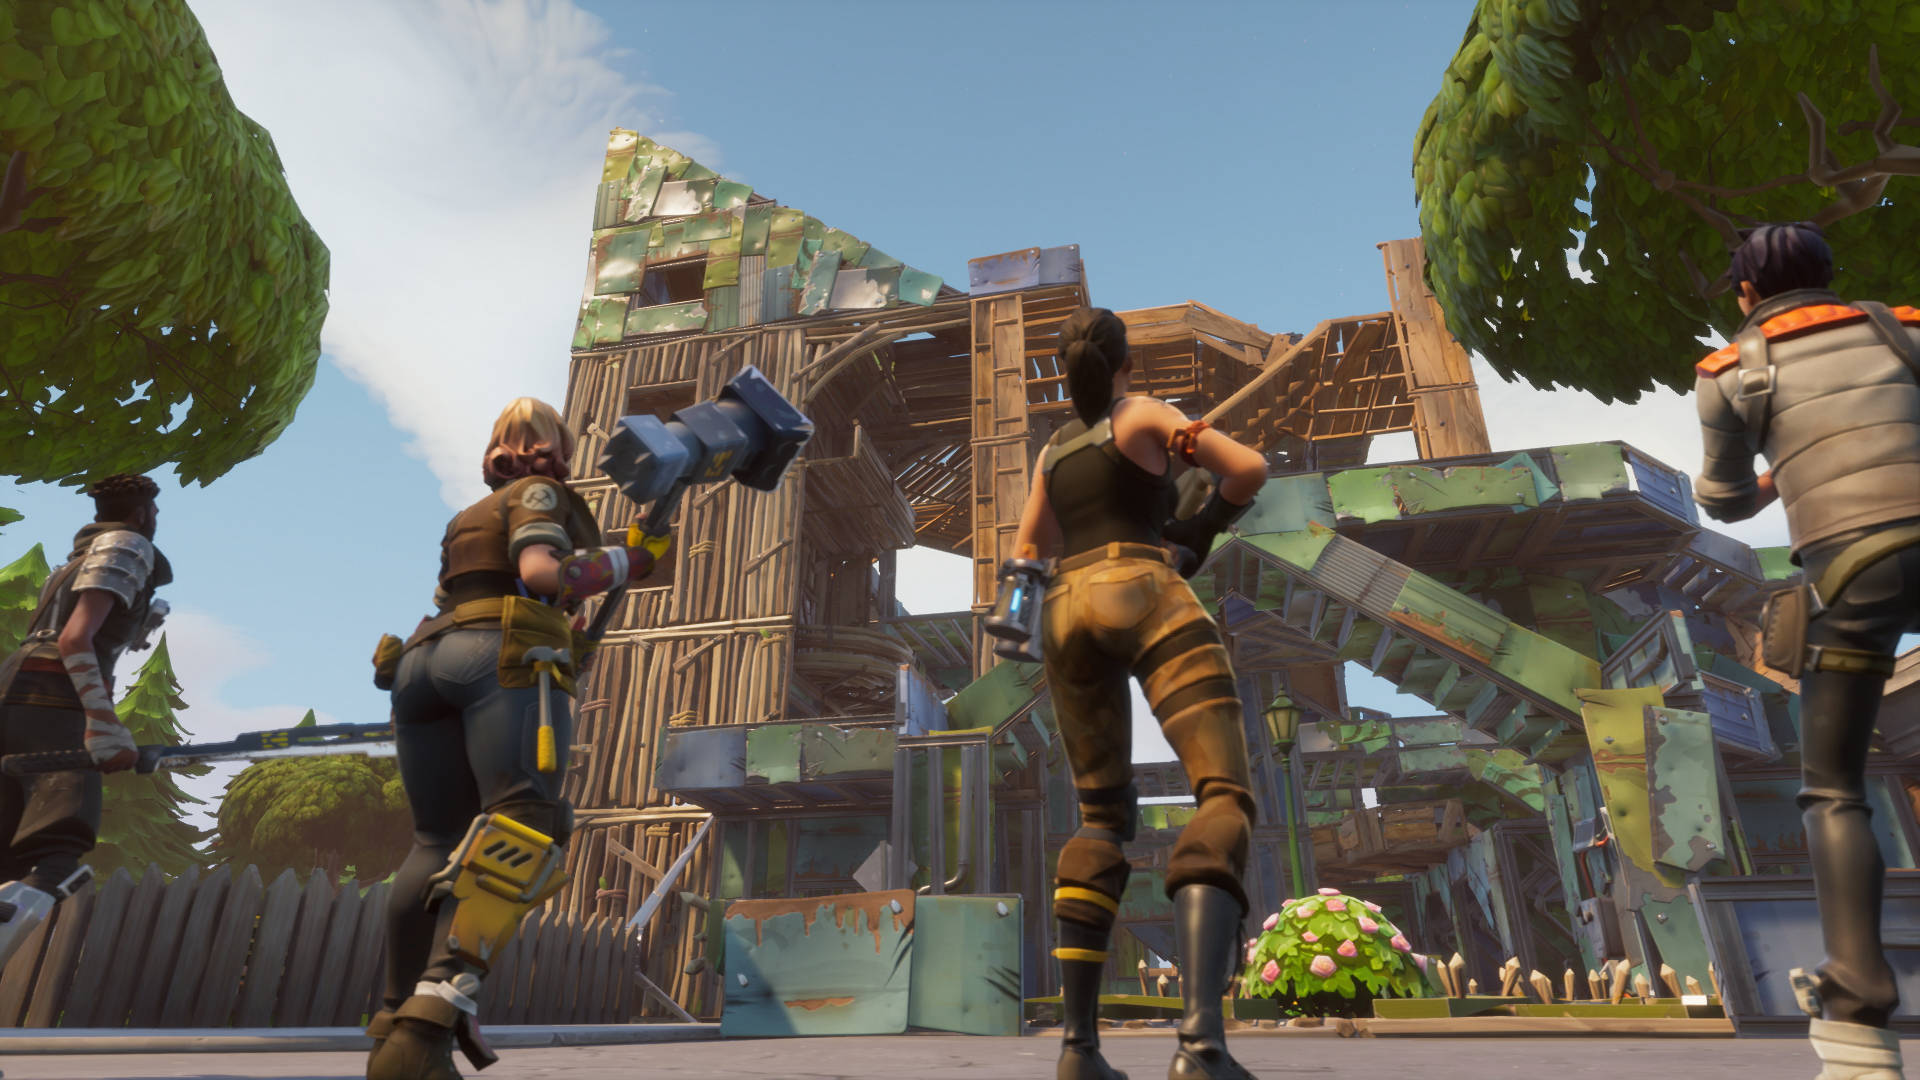 imspeedygonzales has created a practice course for building and editing in fortnite - fortnite how to practice building